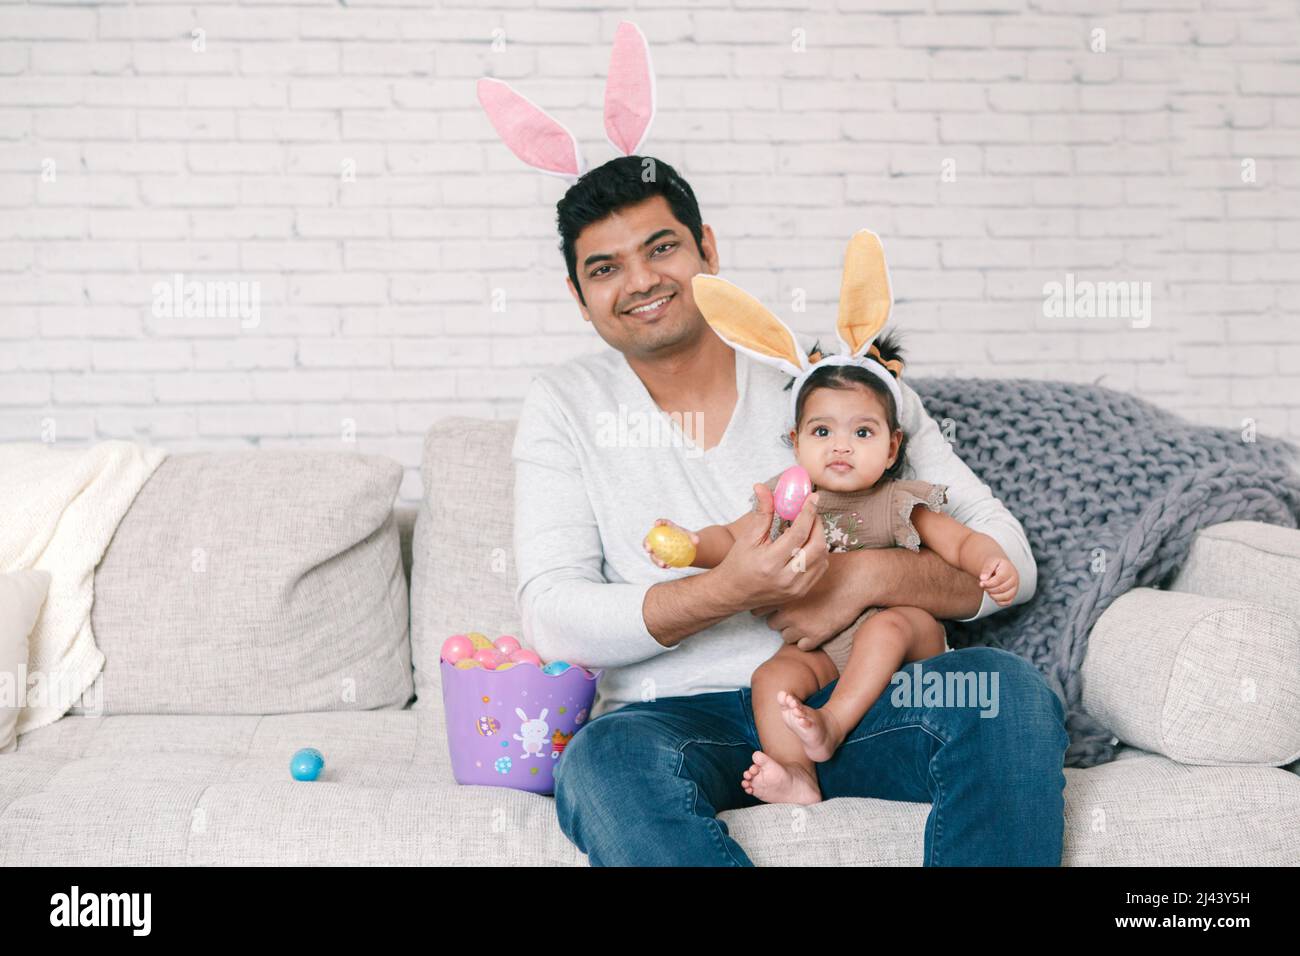 Indian father with baby girl daughter in bunny ears playing toy eggs in basket celebrating Easter. Stock Photo